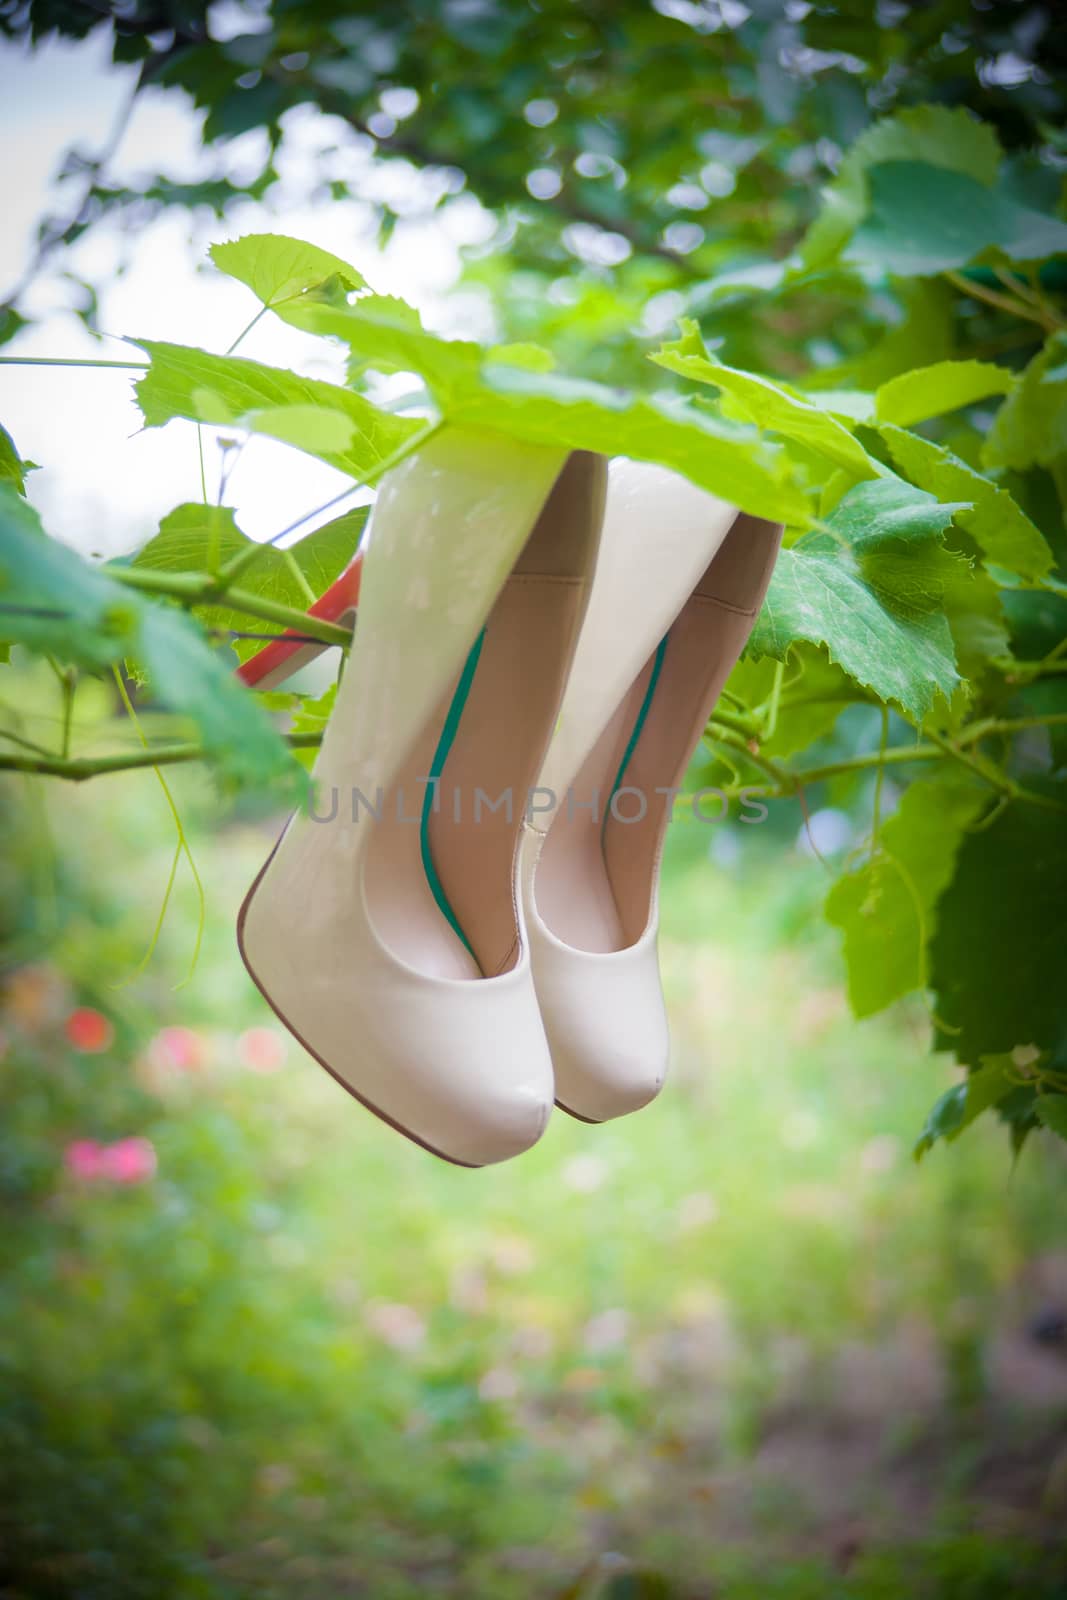 Womens shoes with high heels are hanging on a branch among green leaves